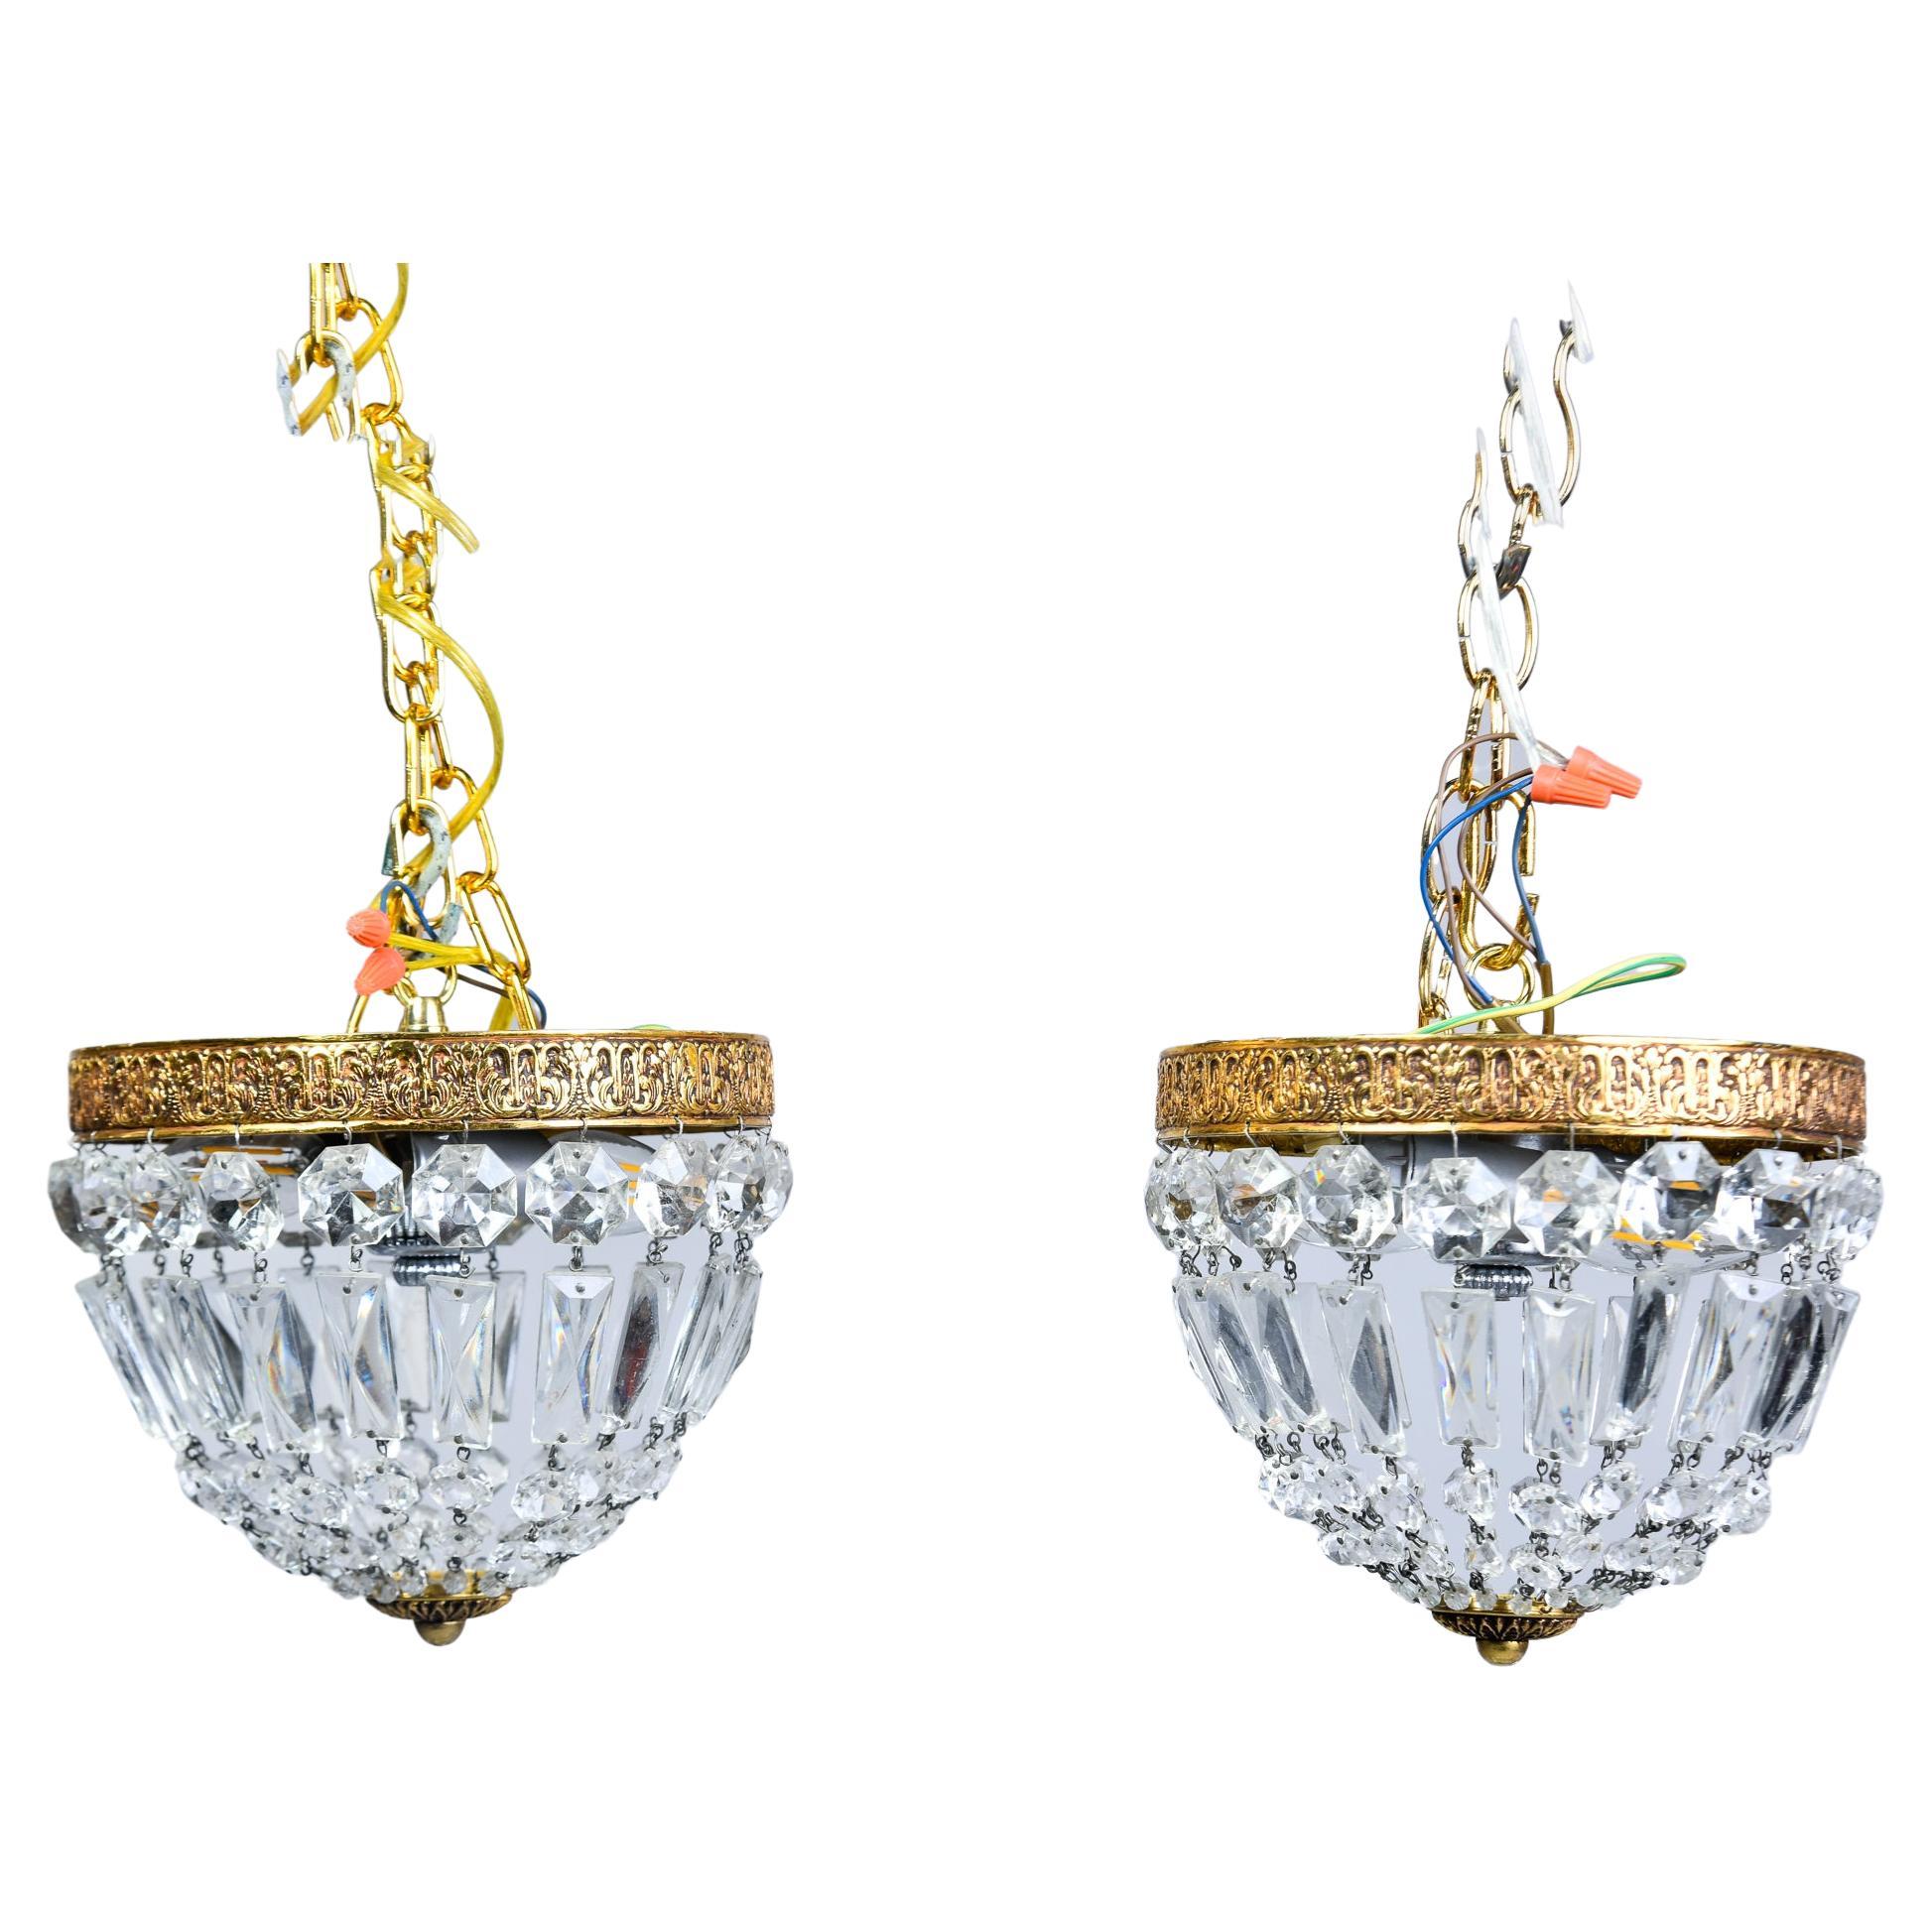 Pair Small Vintage Italian Crystal and Brass Basket Form Ceiling Lights